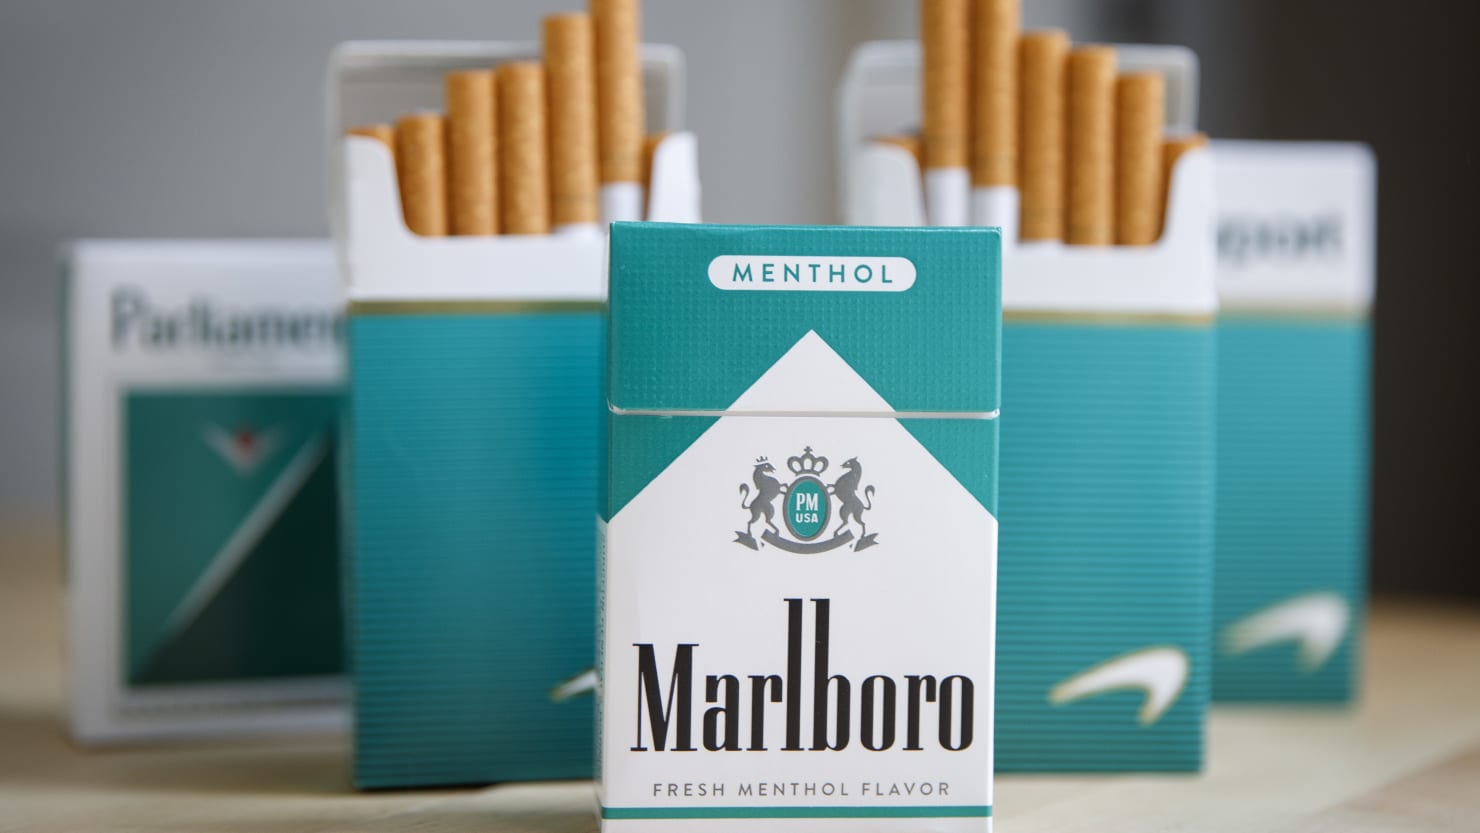 The Biden administration could drastically reduce nicotine in cigarettes, WSJ reports